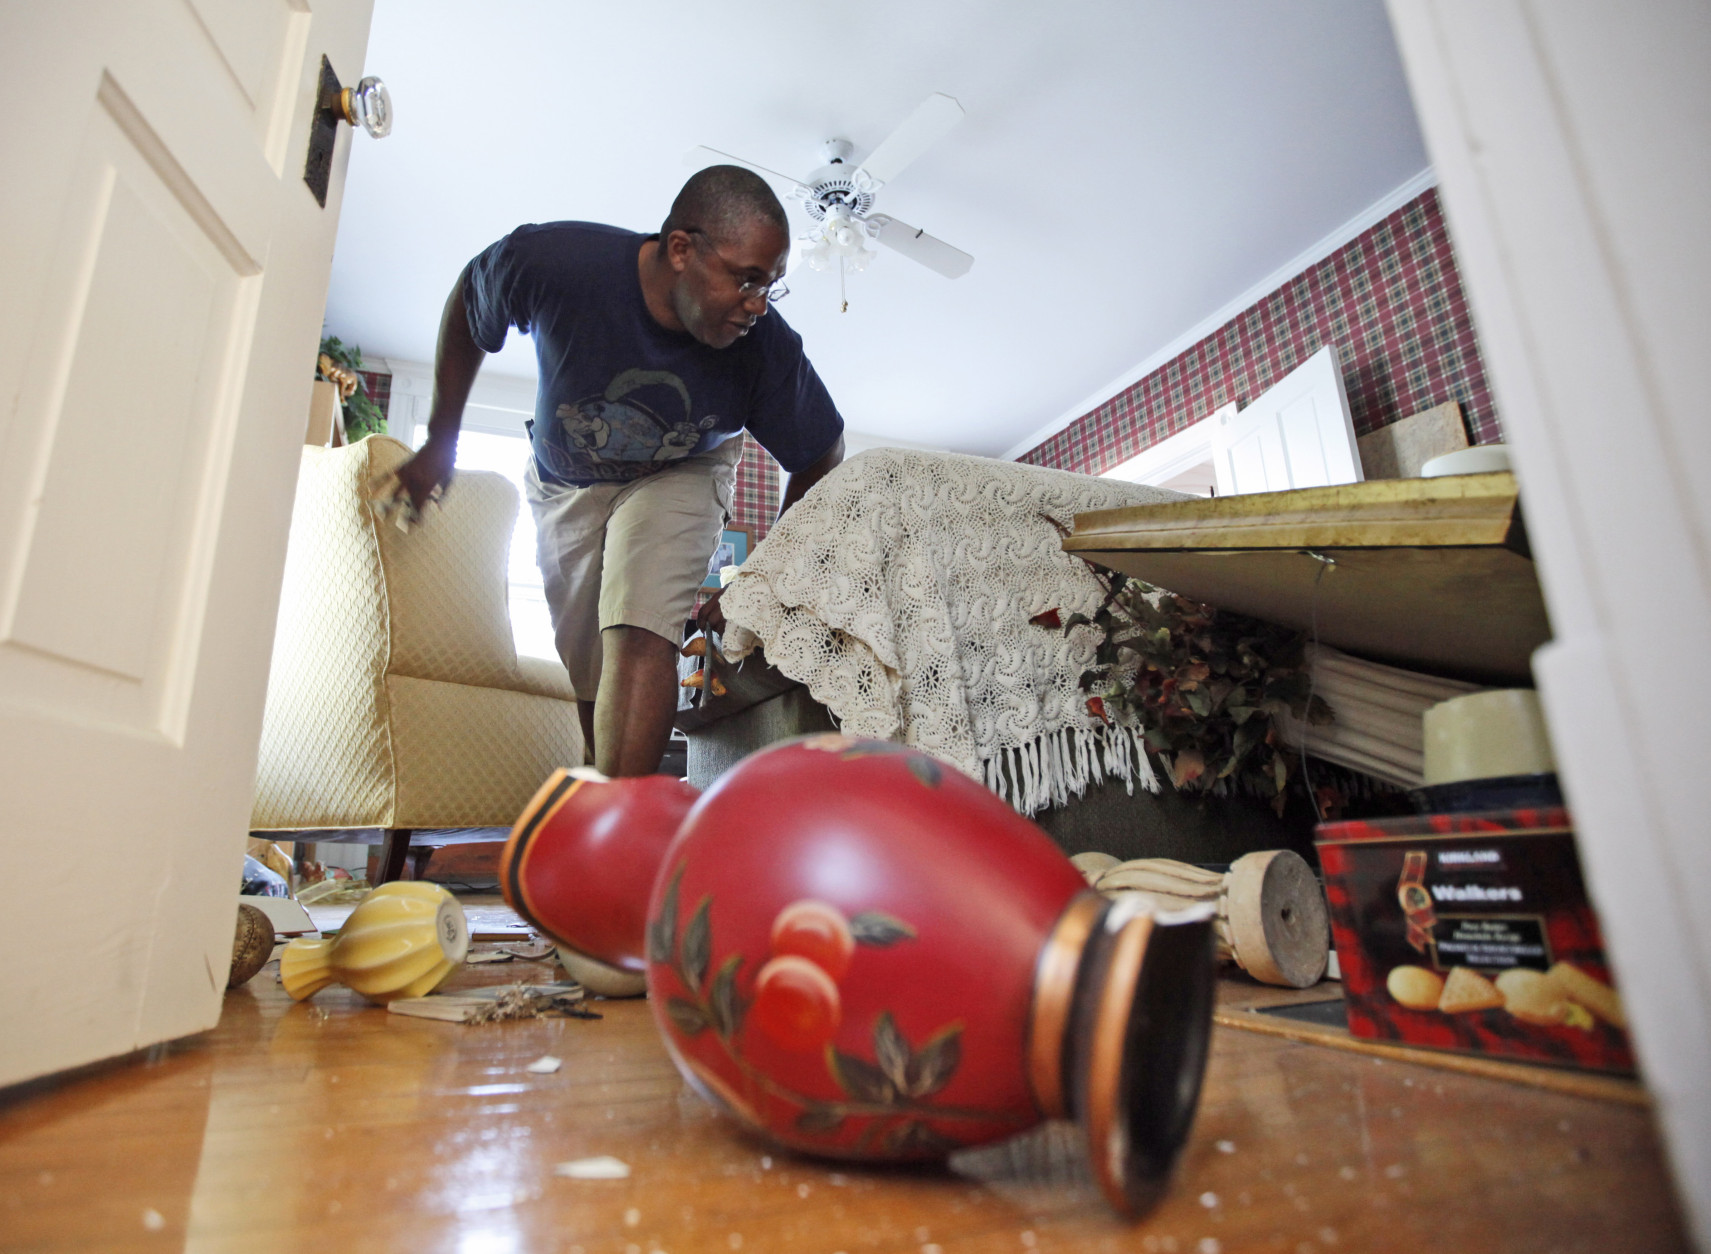 Tony Williams surveys damage at his Mineral, Va. home after an earthquake struck Tuesday, Aug. 23, 2011. Items in his home were knocked over and displaced, and the home suffered some structural damage after the most powerful earthquake to strike the East Coast in 67 years shook buildings and rattled nerves from South Carolina to New England. The quake was centered near Mineral, a small town northwest of Richmond. (AP Photo/Steve Helber)